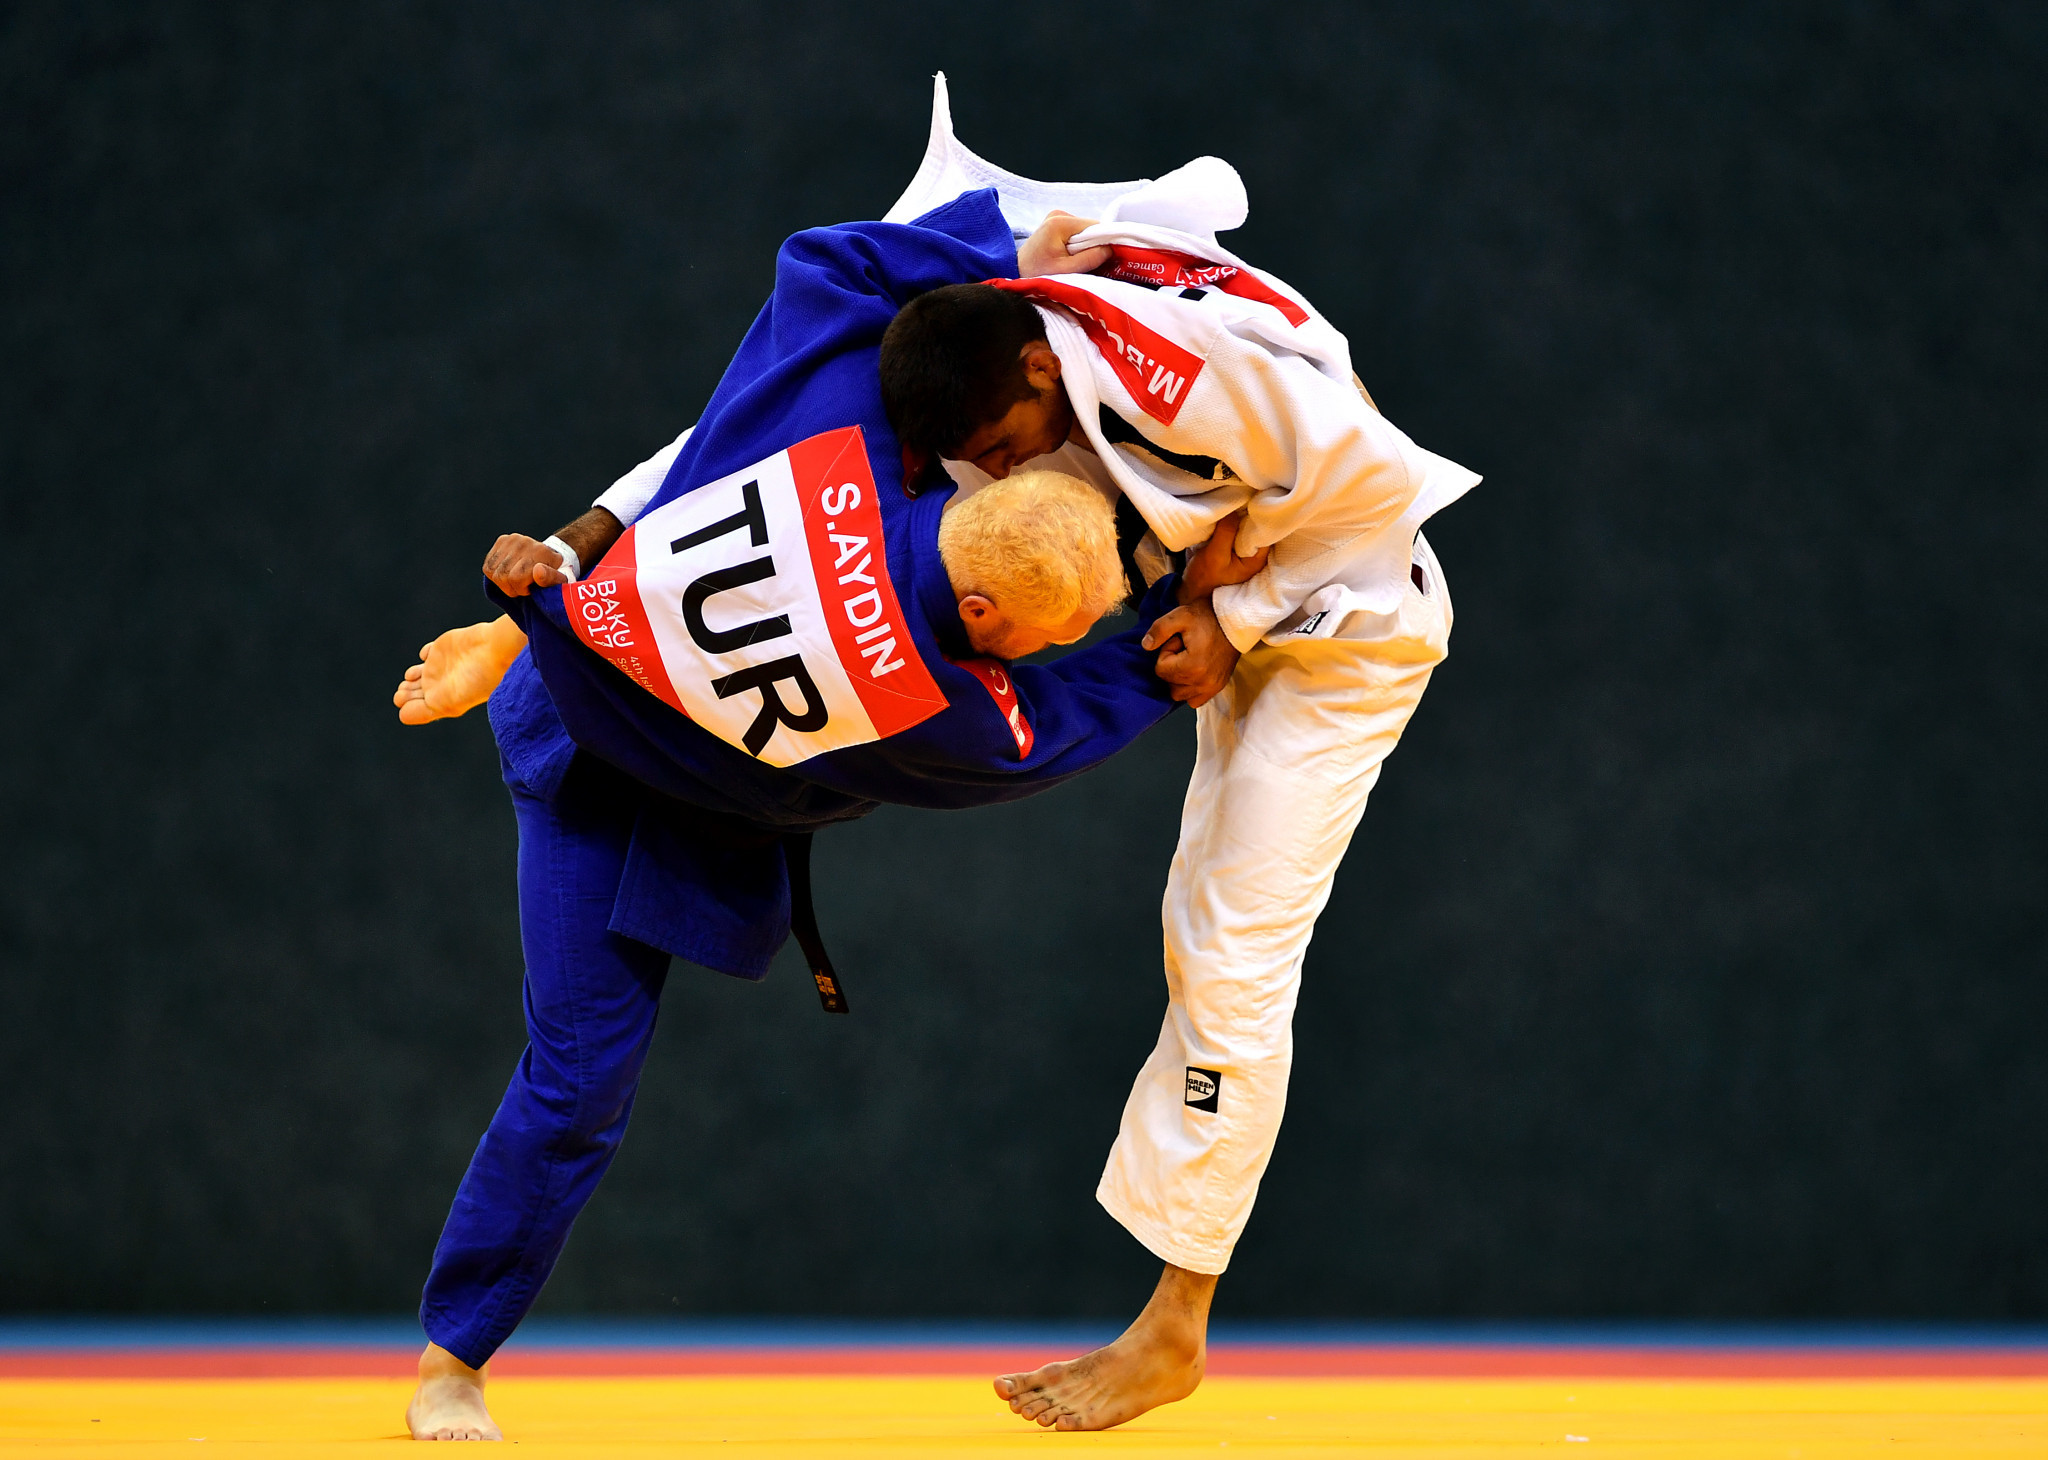 The IBSA Judo World Championships are set to be held in Azerbaijan in November ©Getty Images